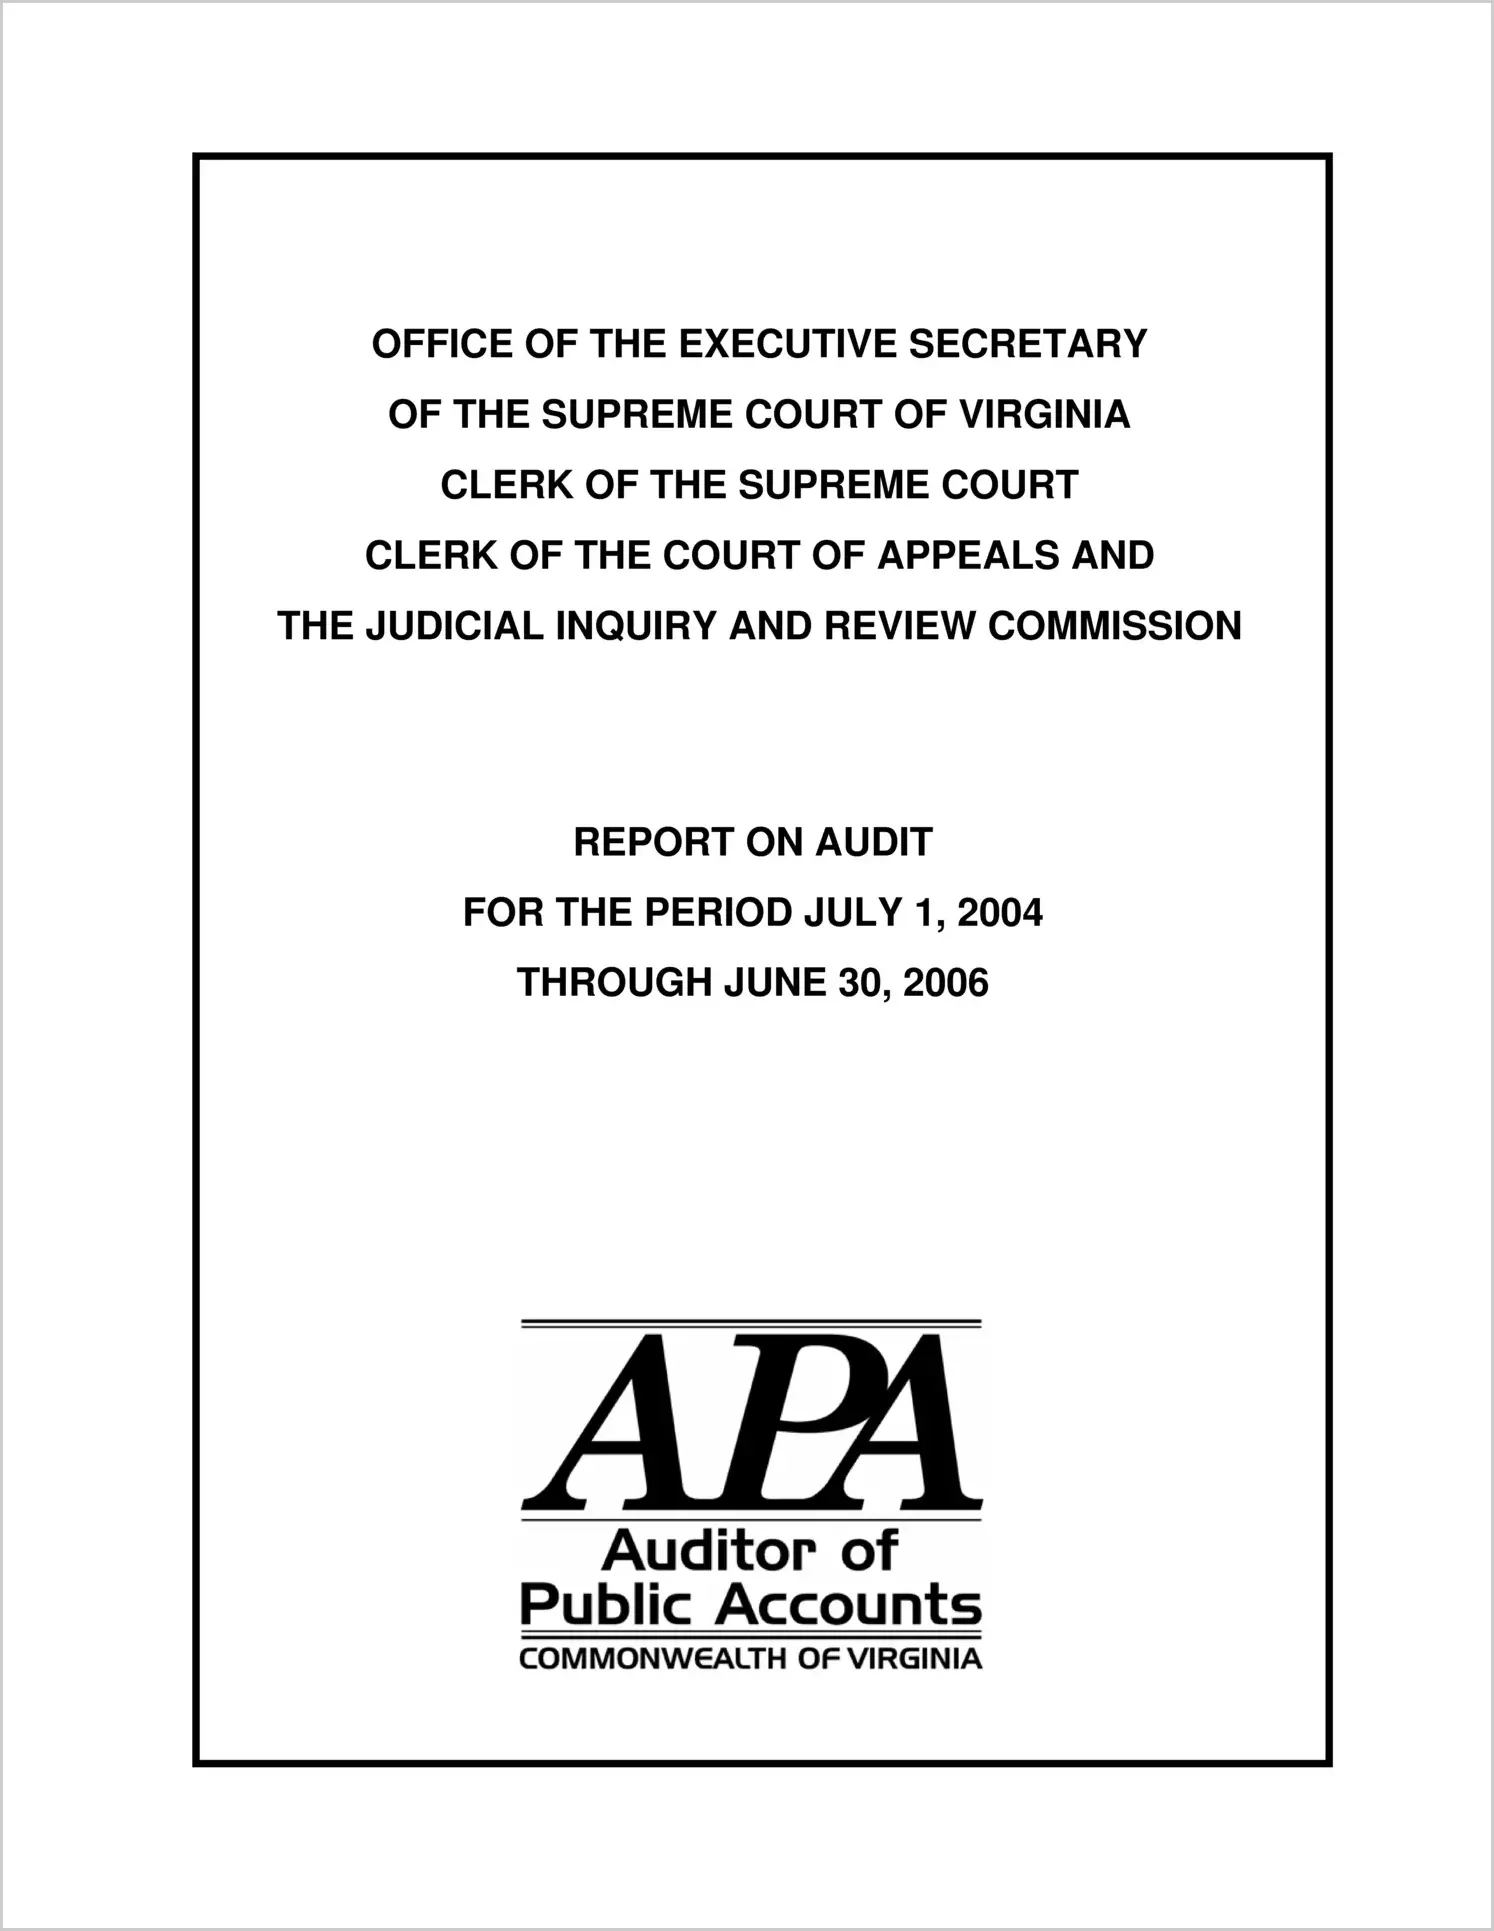 Office of the Executive Secretary of the Supreme Court of Virginia Clerk of the Supreme Court Clerk of the Court of Appeals and the Judicial Inquiry and Review Commission for the period July 1, 2004 through June 30, 2006